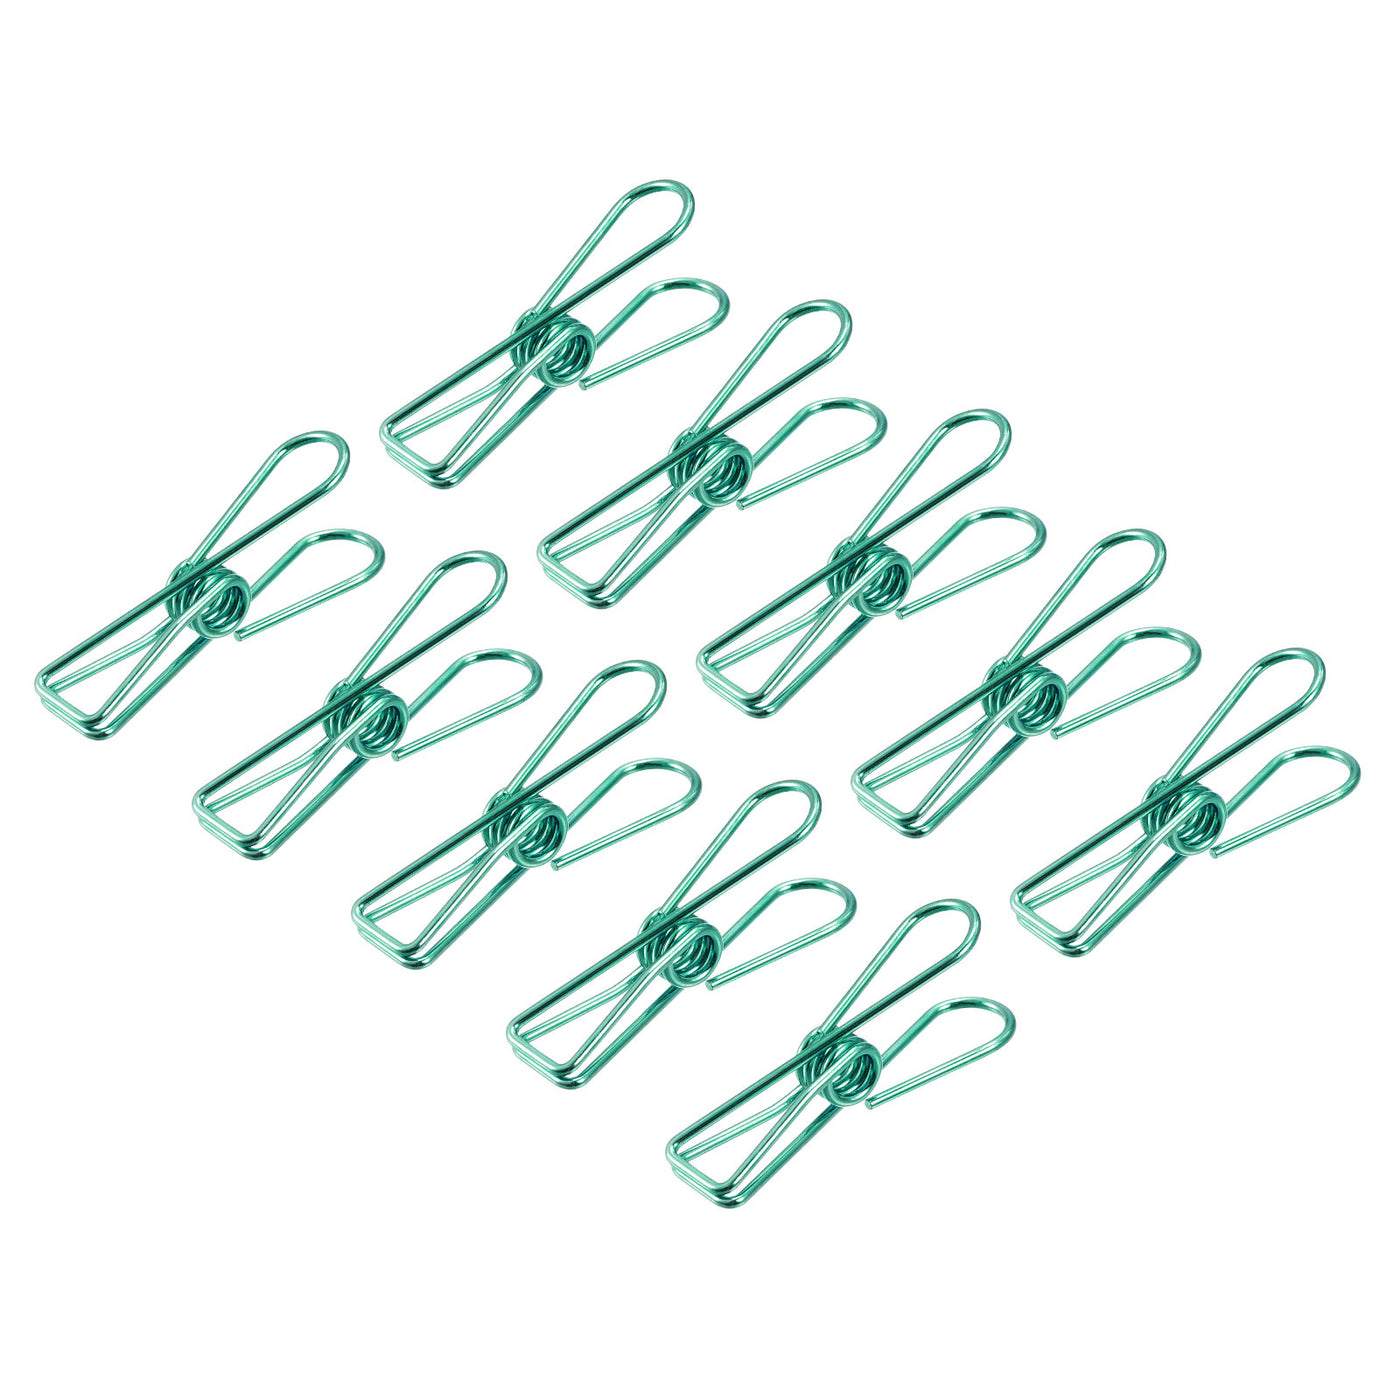 uxcell Uxcell Tablecloth Clips, 32mm Carbon Steel Clamps for Fixing Table Cloth, Green 25 Pcs